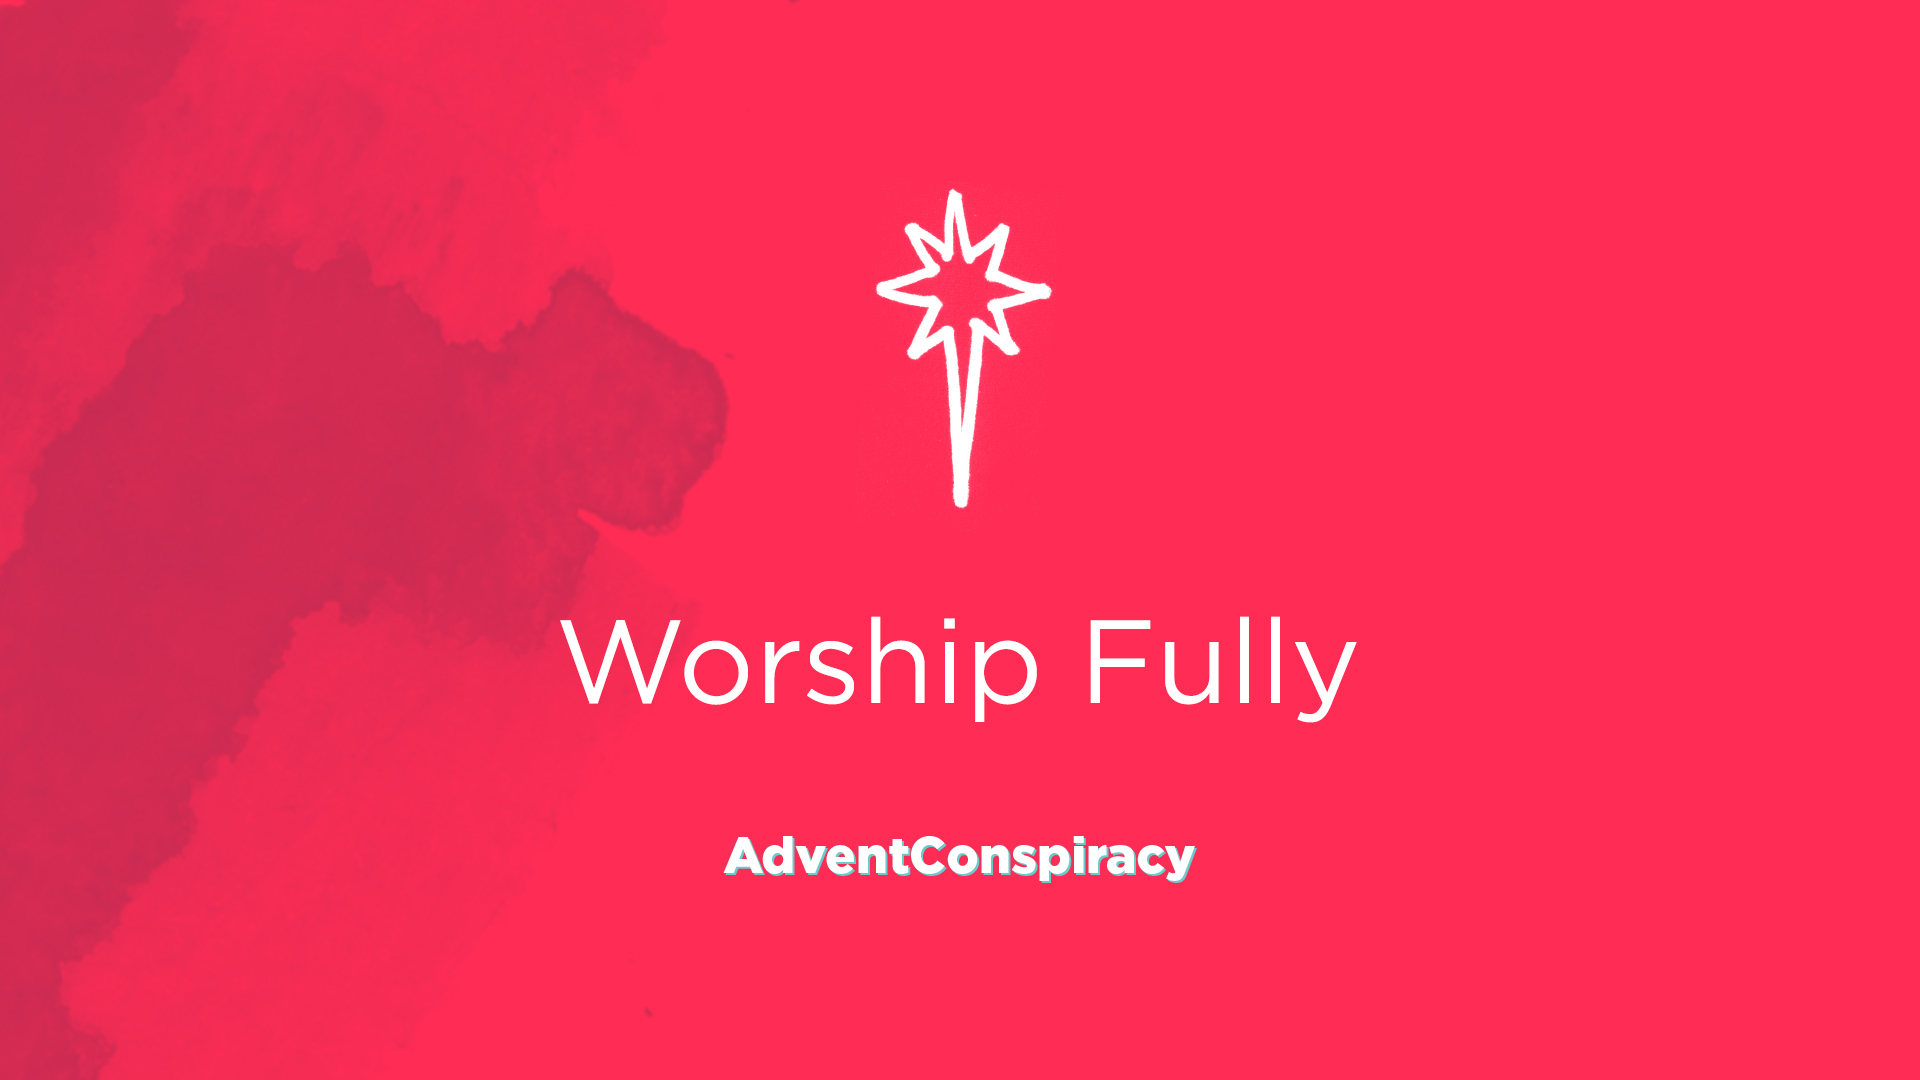 Advent Conspiracy - Worship Fully